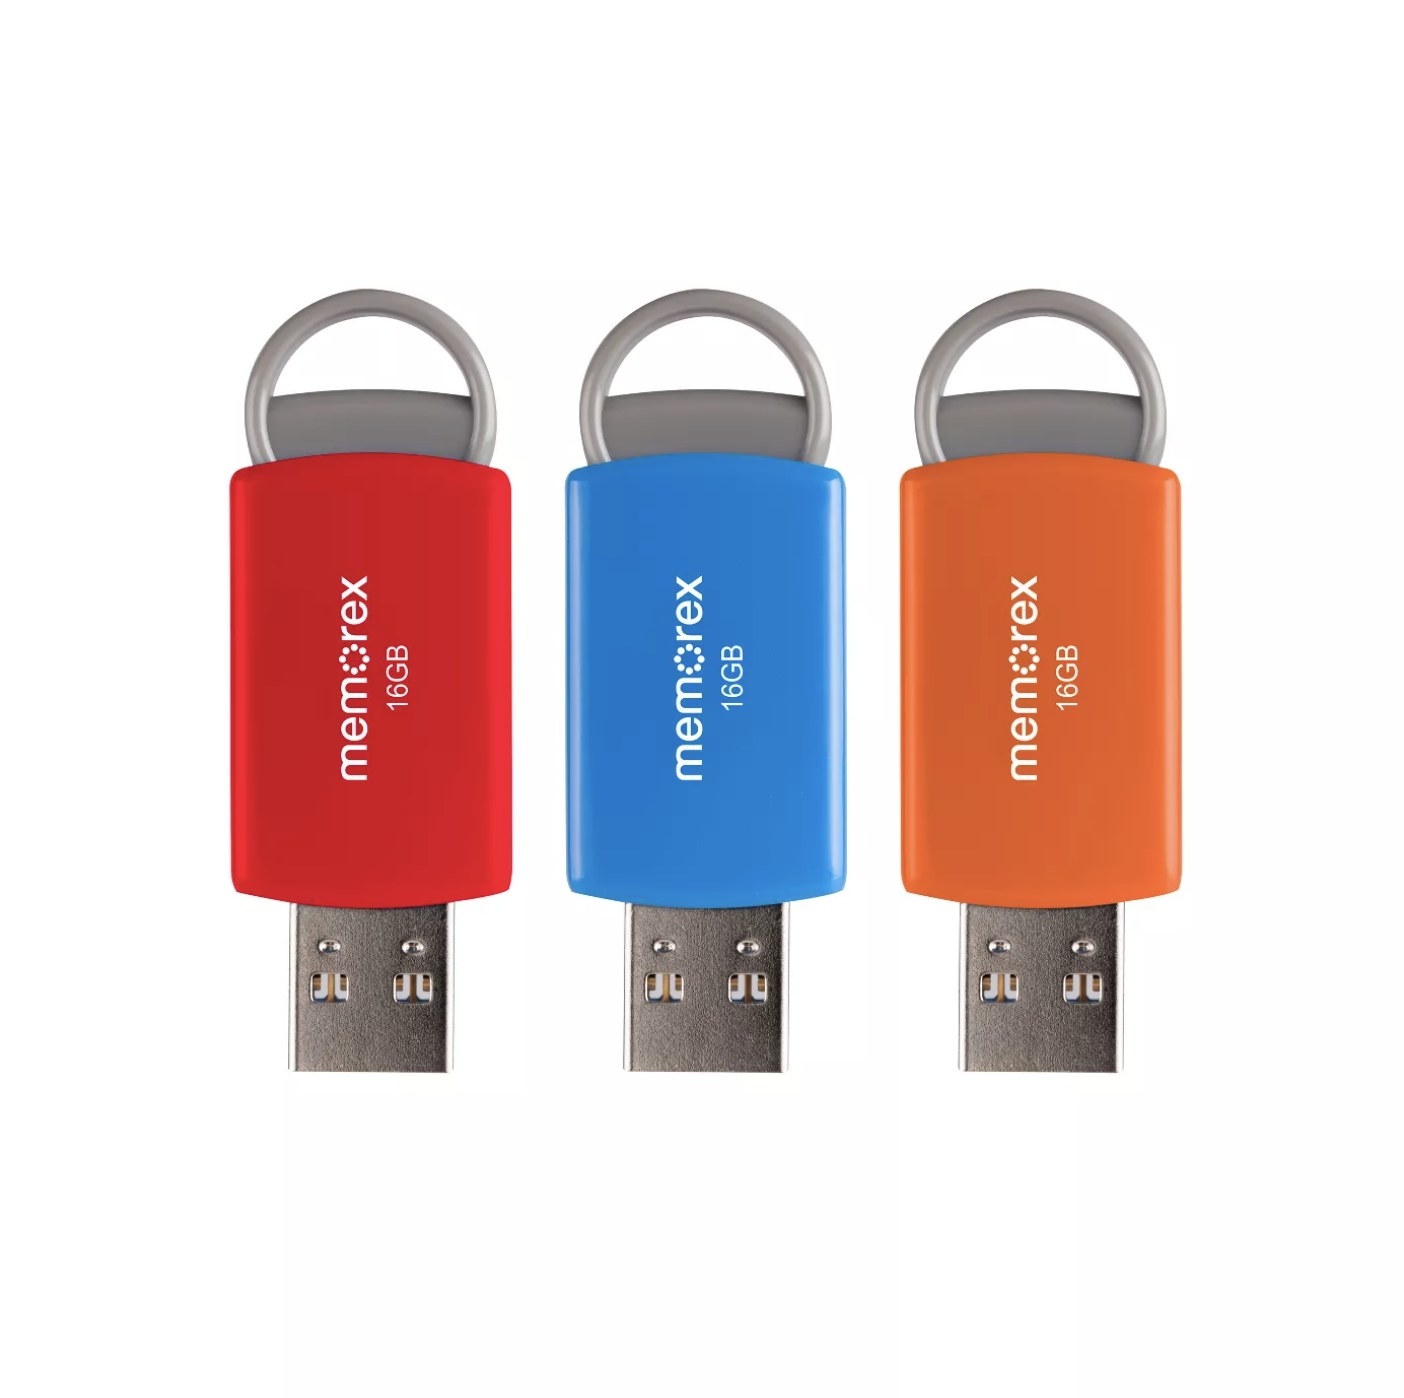 Three flash drives in red, blue, and orange